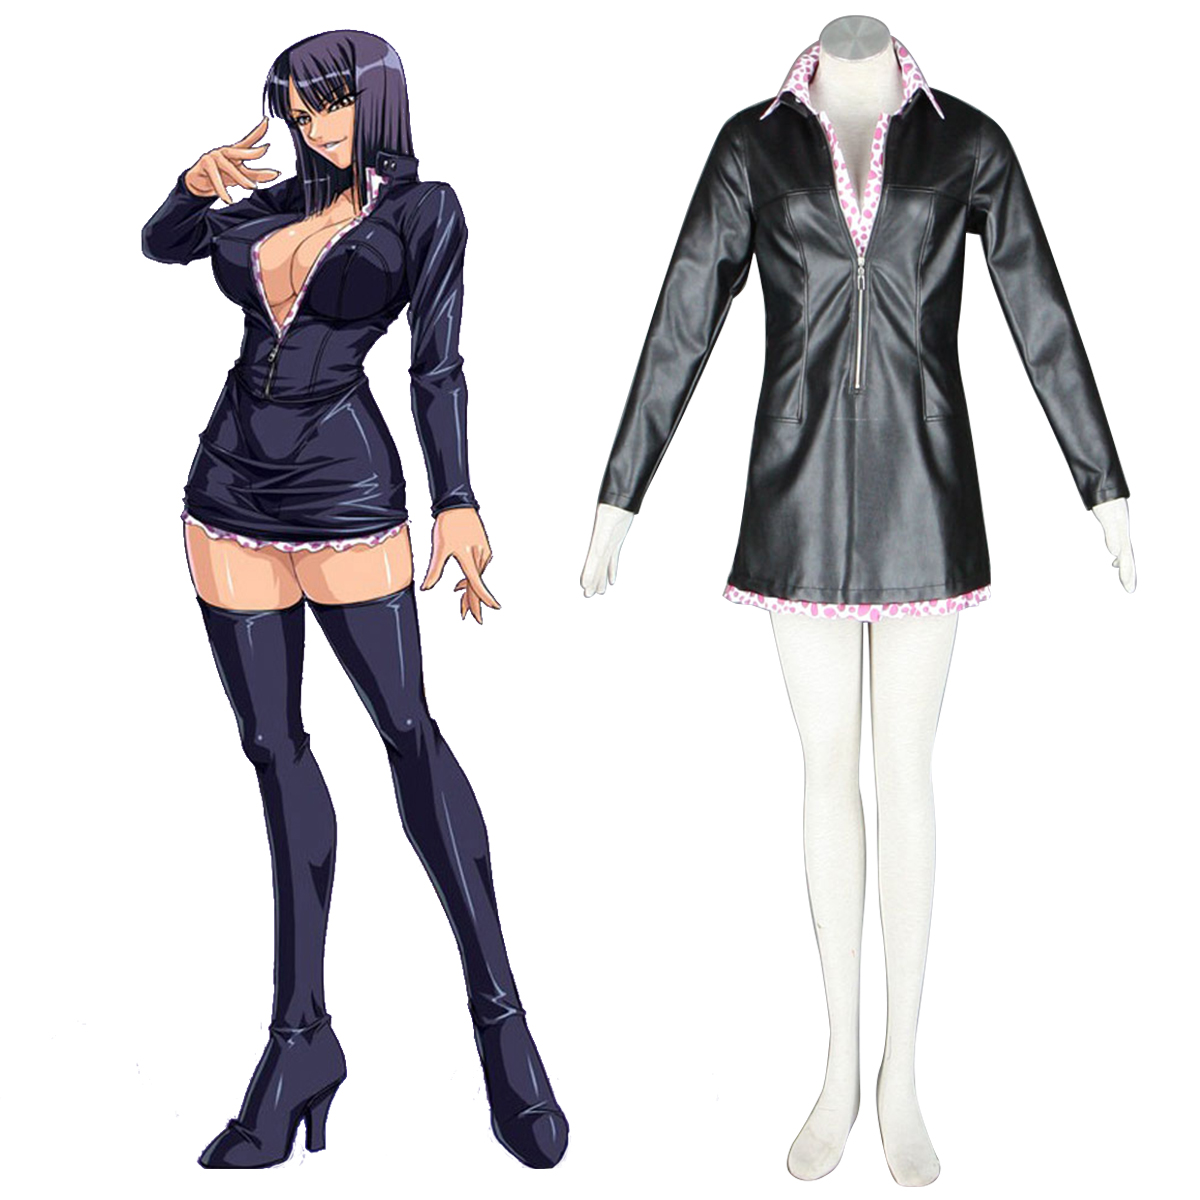 One Piece Nico Robin 2 Green Anime Cosplay Costumes Outfit One Piece Nico Robin 2 Green Anime Cosplay Costumes Outfit